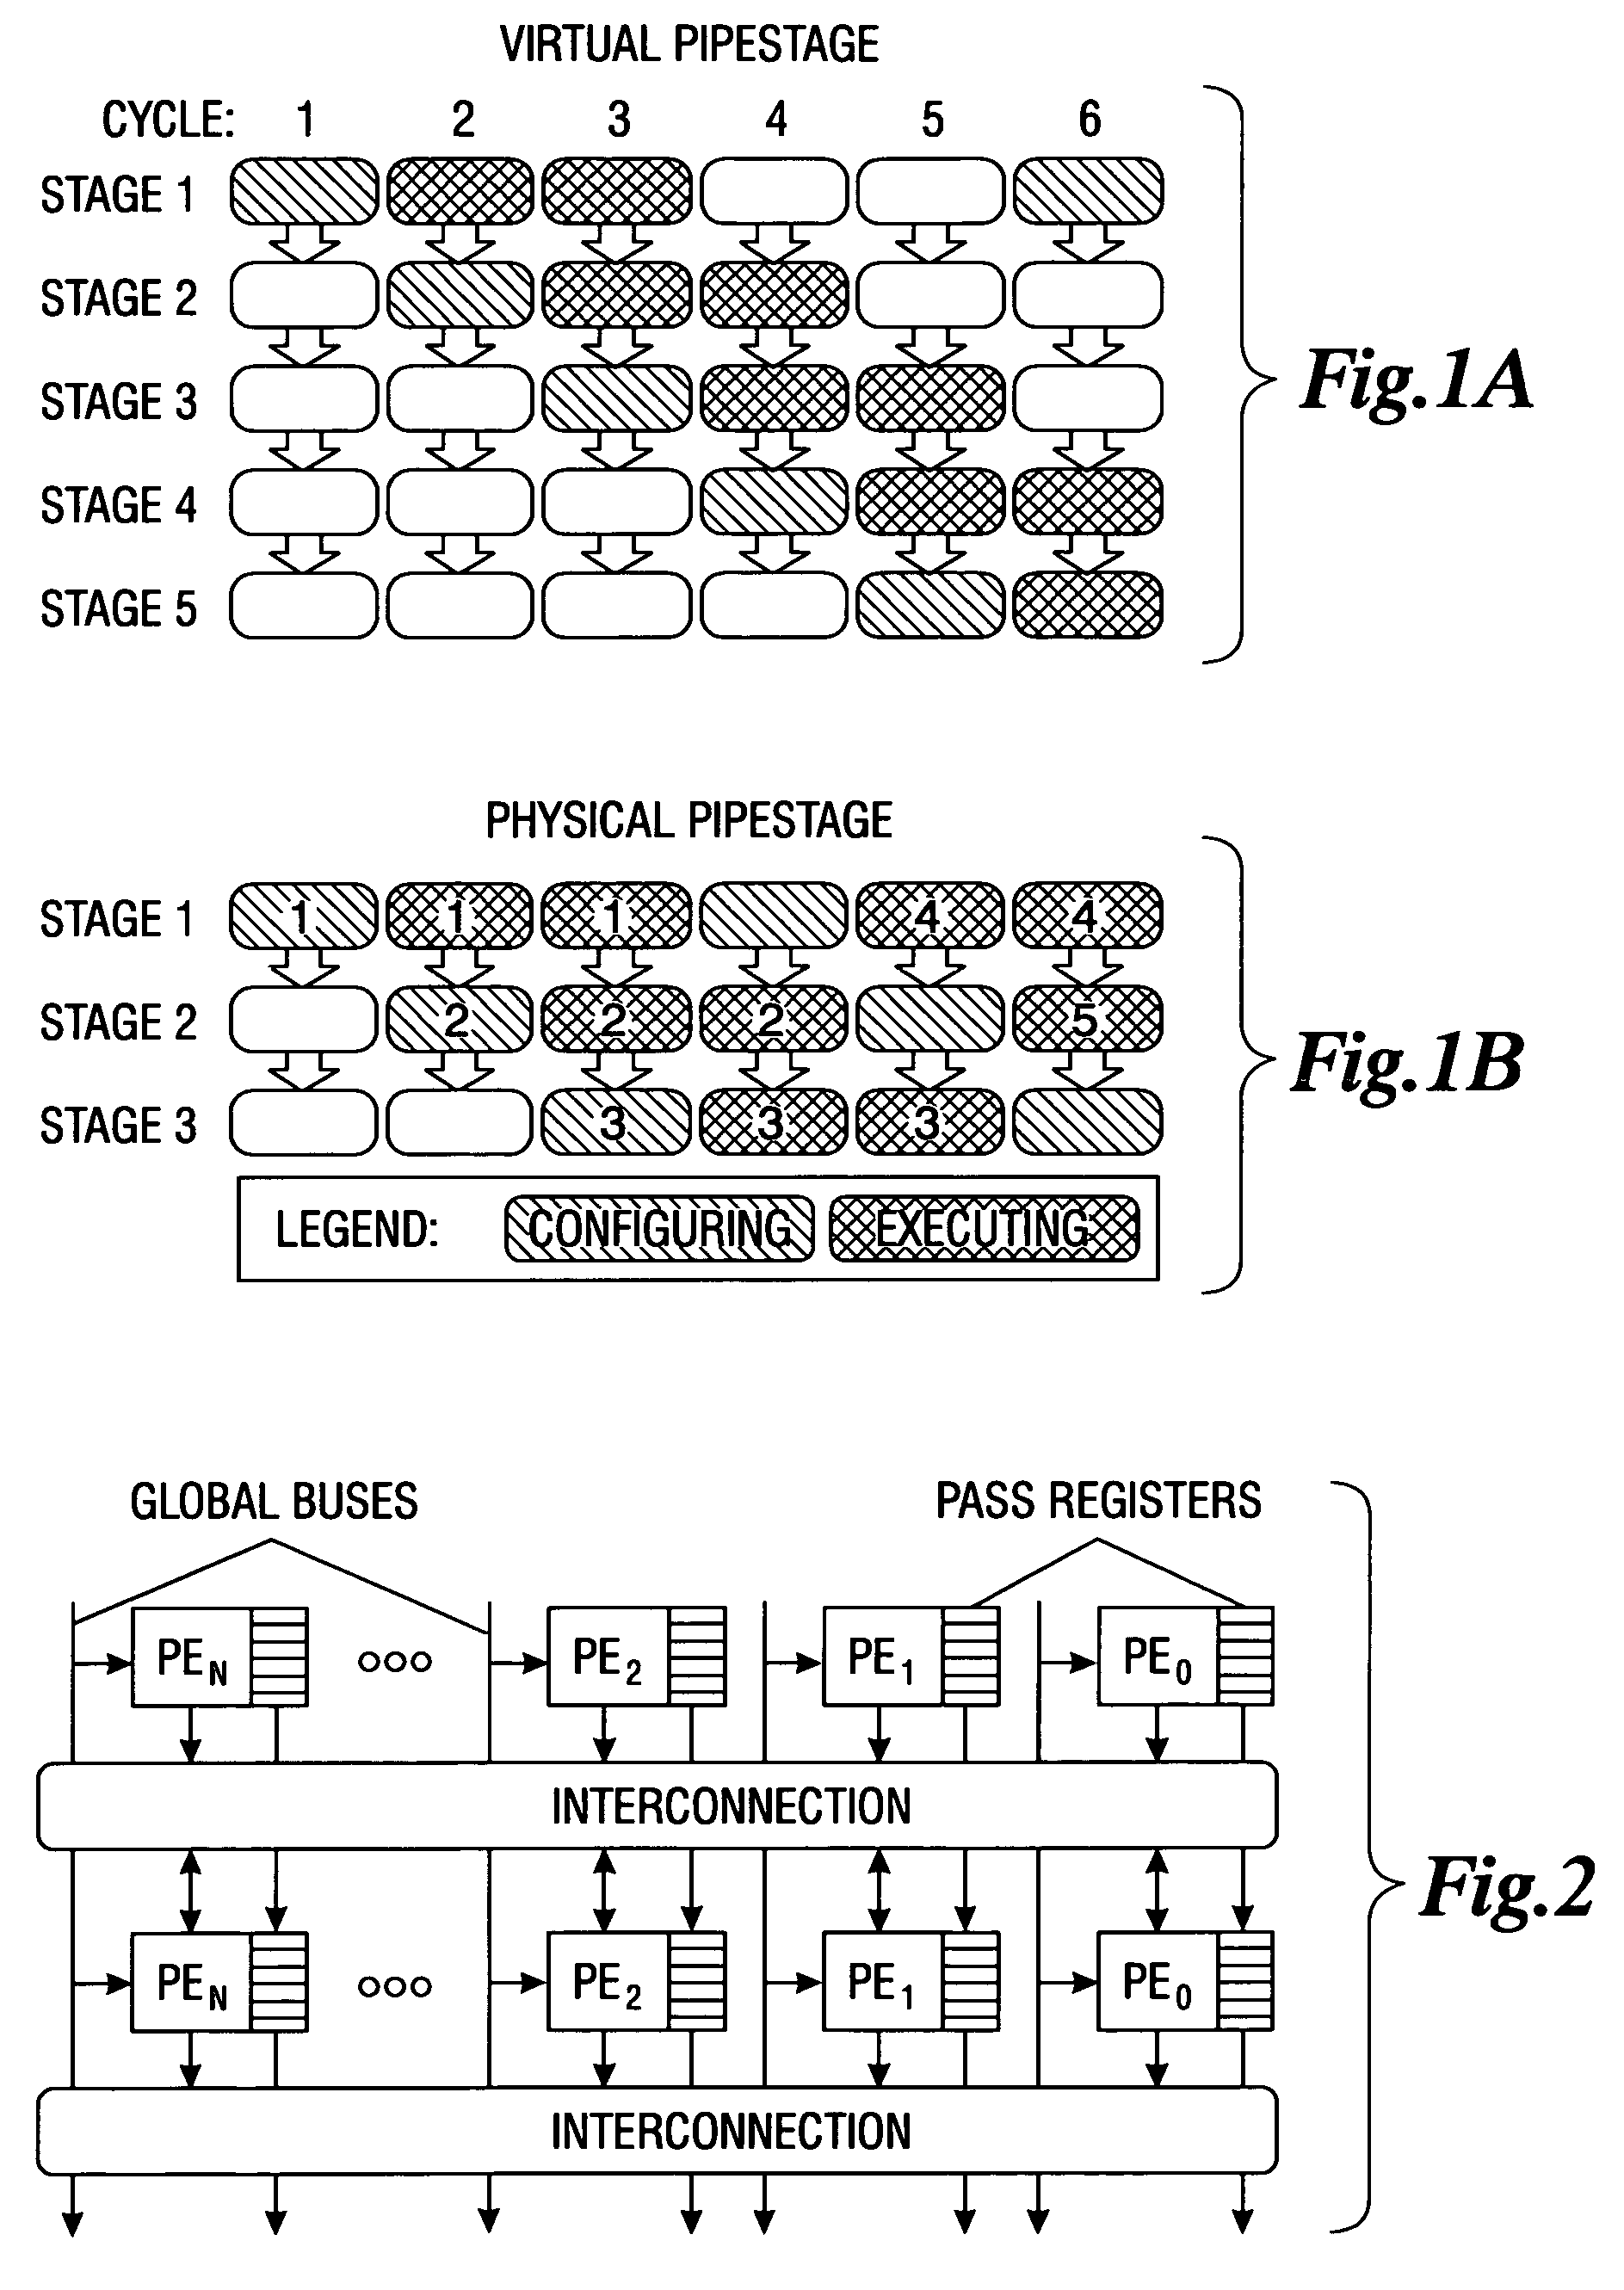 Programmable pipeline fabric utilizing partially global configuration buses